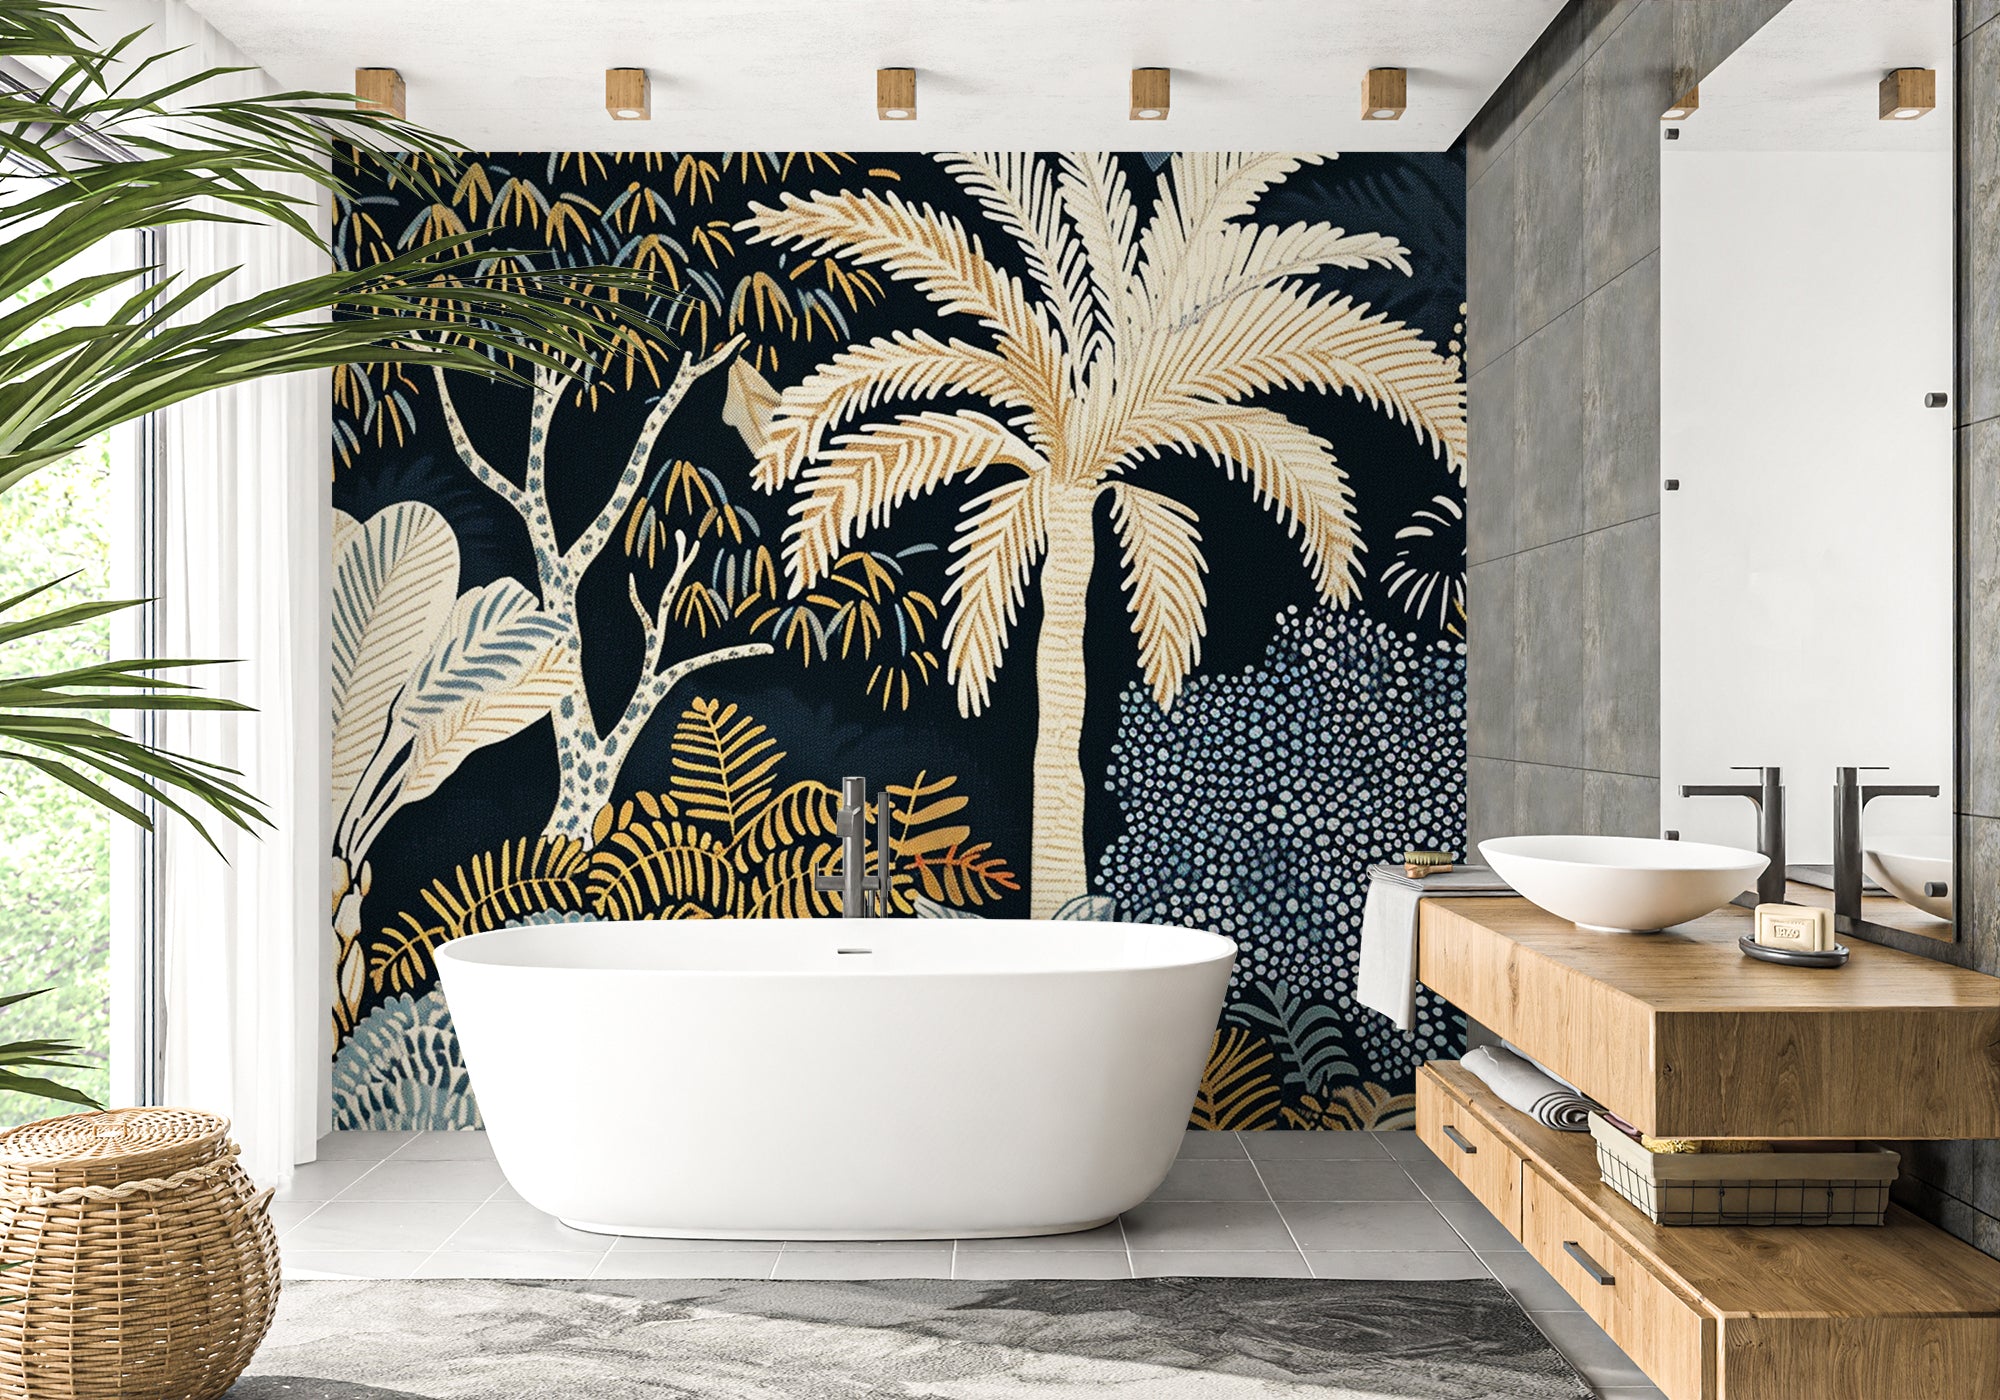 Tropical Radiance – Wall Luxuriance in Large Format